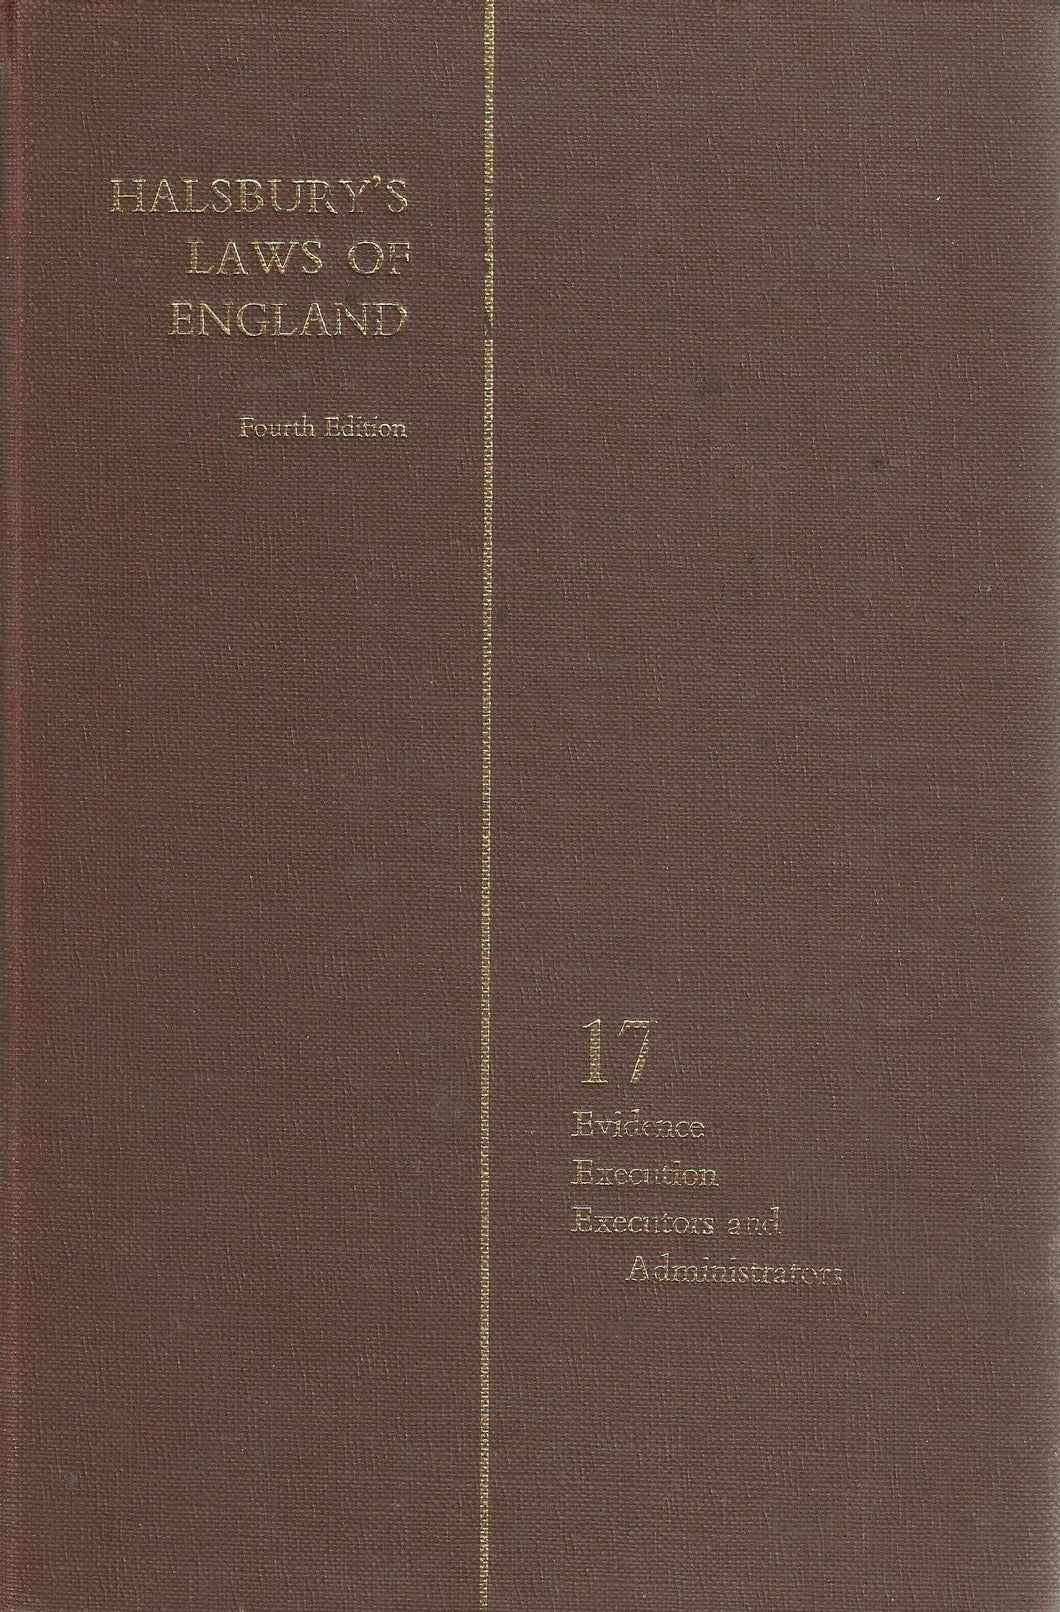 Halsbury's Laws of England, Fourth Edition - 17: Evidence, Execution, Executors and Administrators